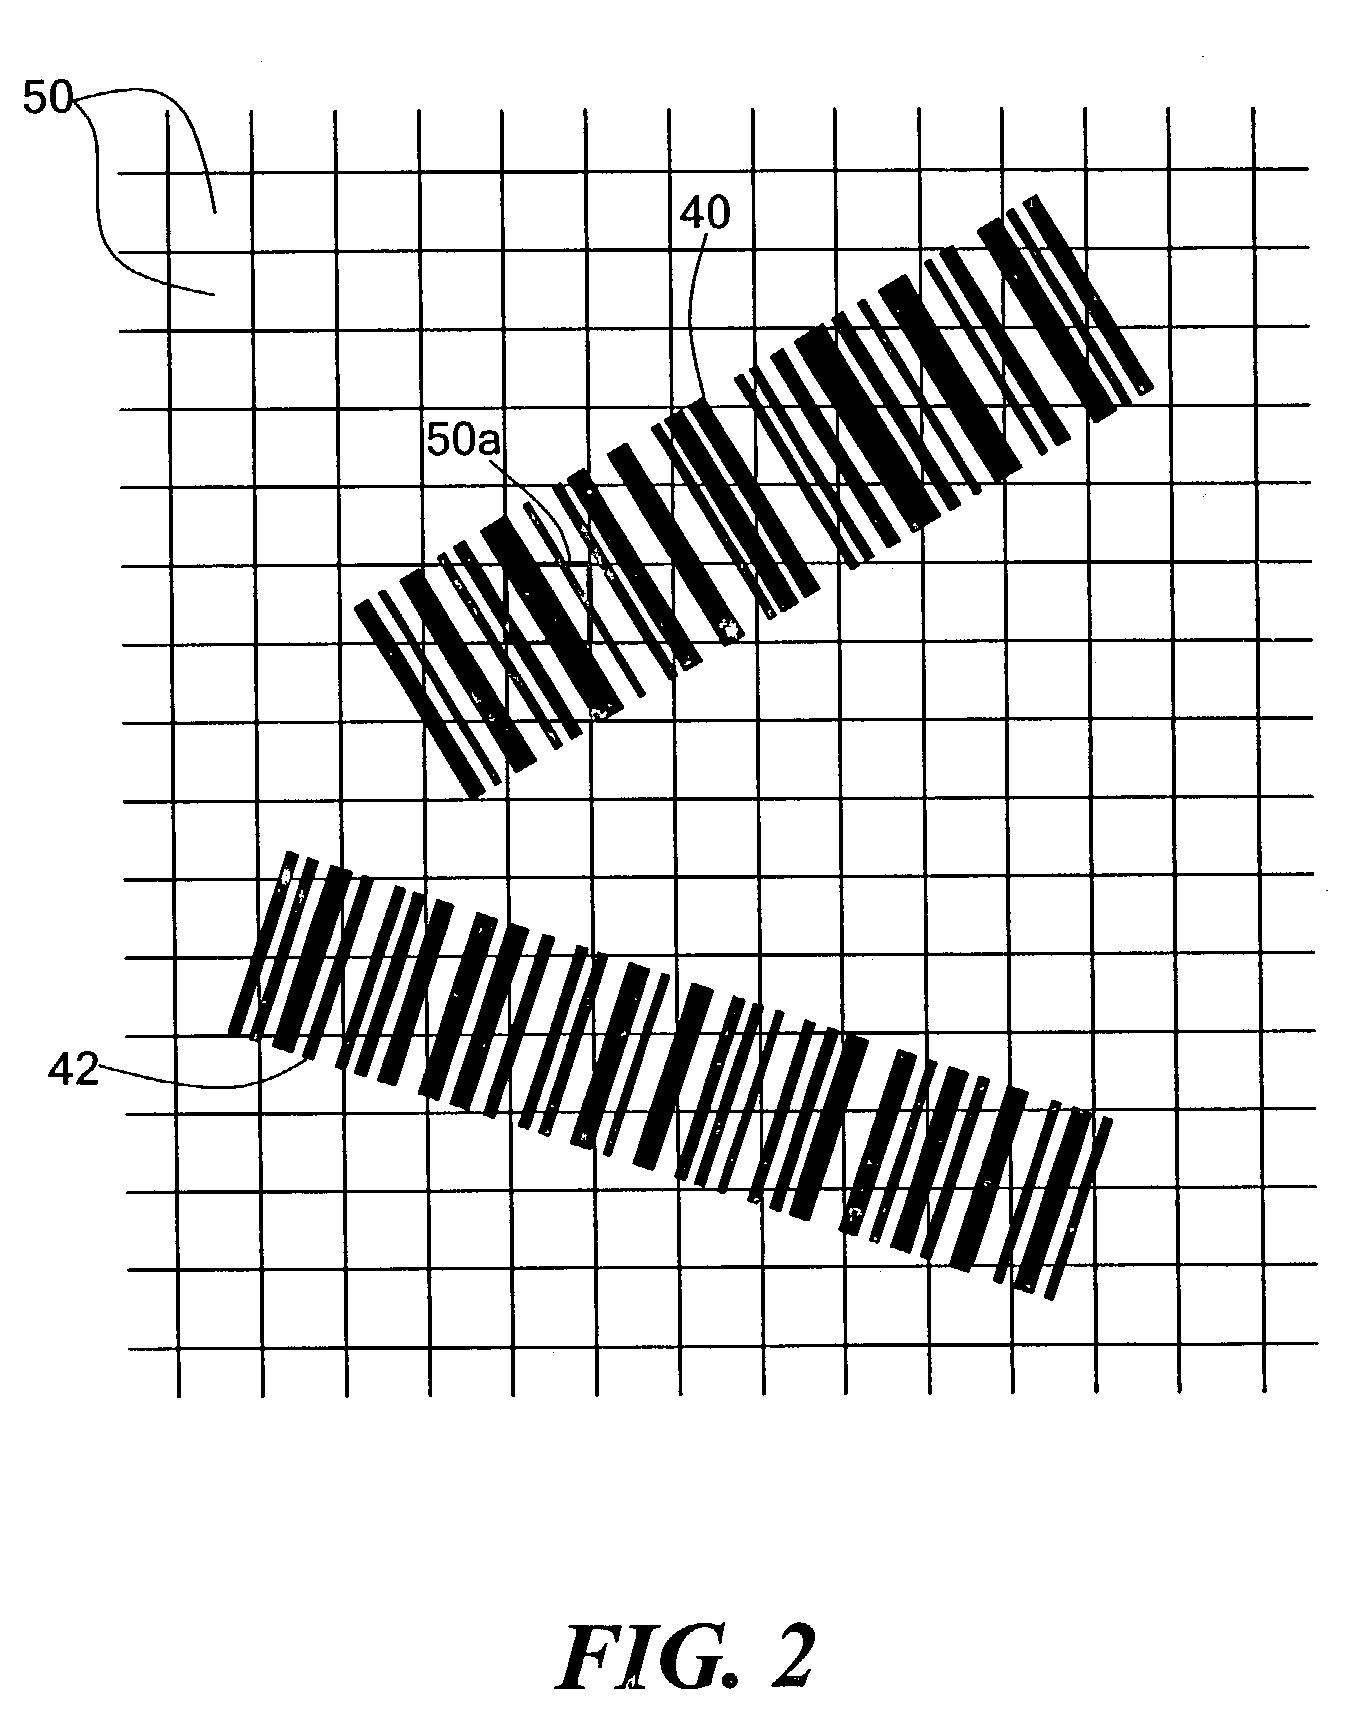 Barcode detection system